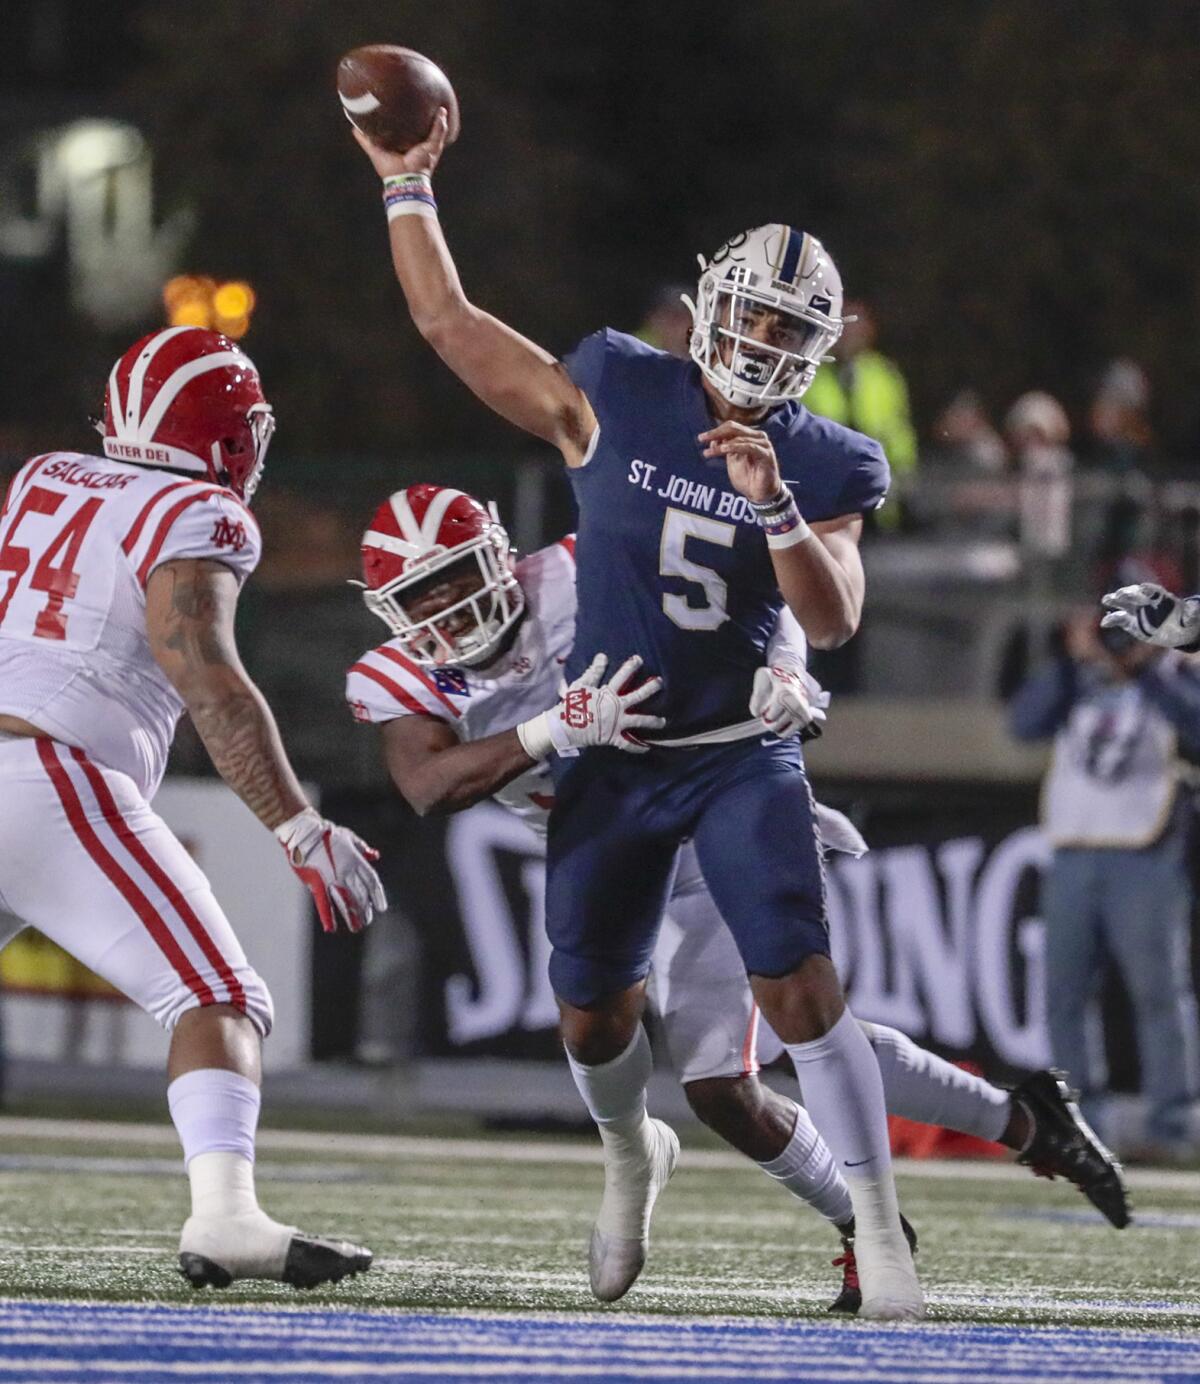 Mater Dei defenders pressure St. John Bosco quarterback DJ Uiagalalei during the Southern Section Division 1 championship game Nov. 30, 2019, at Cerritos College.